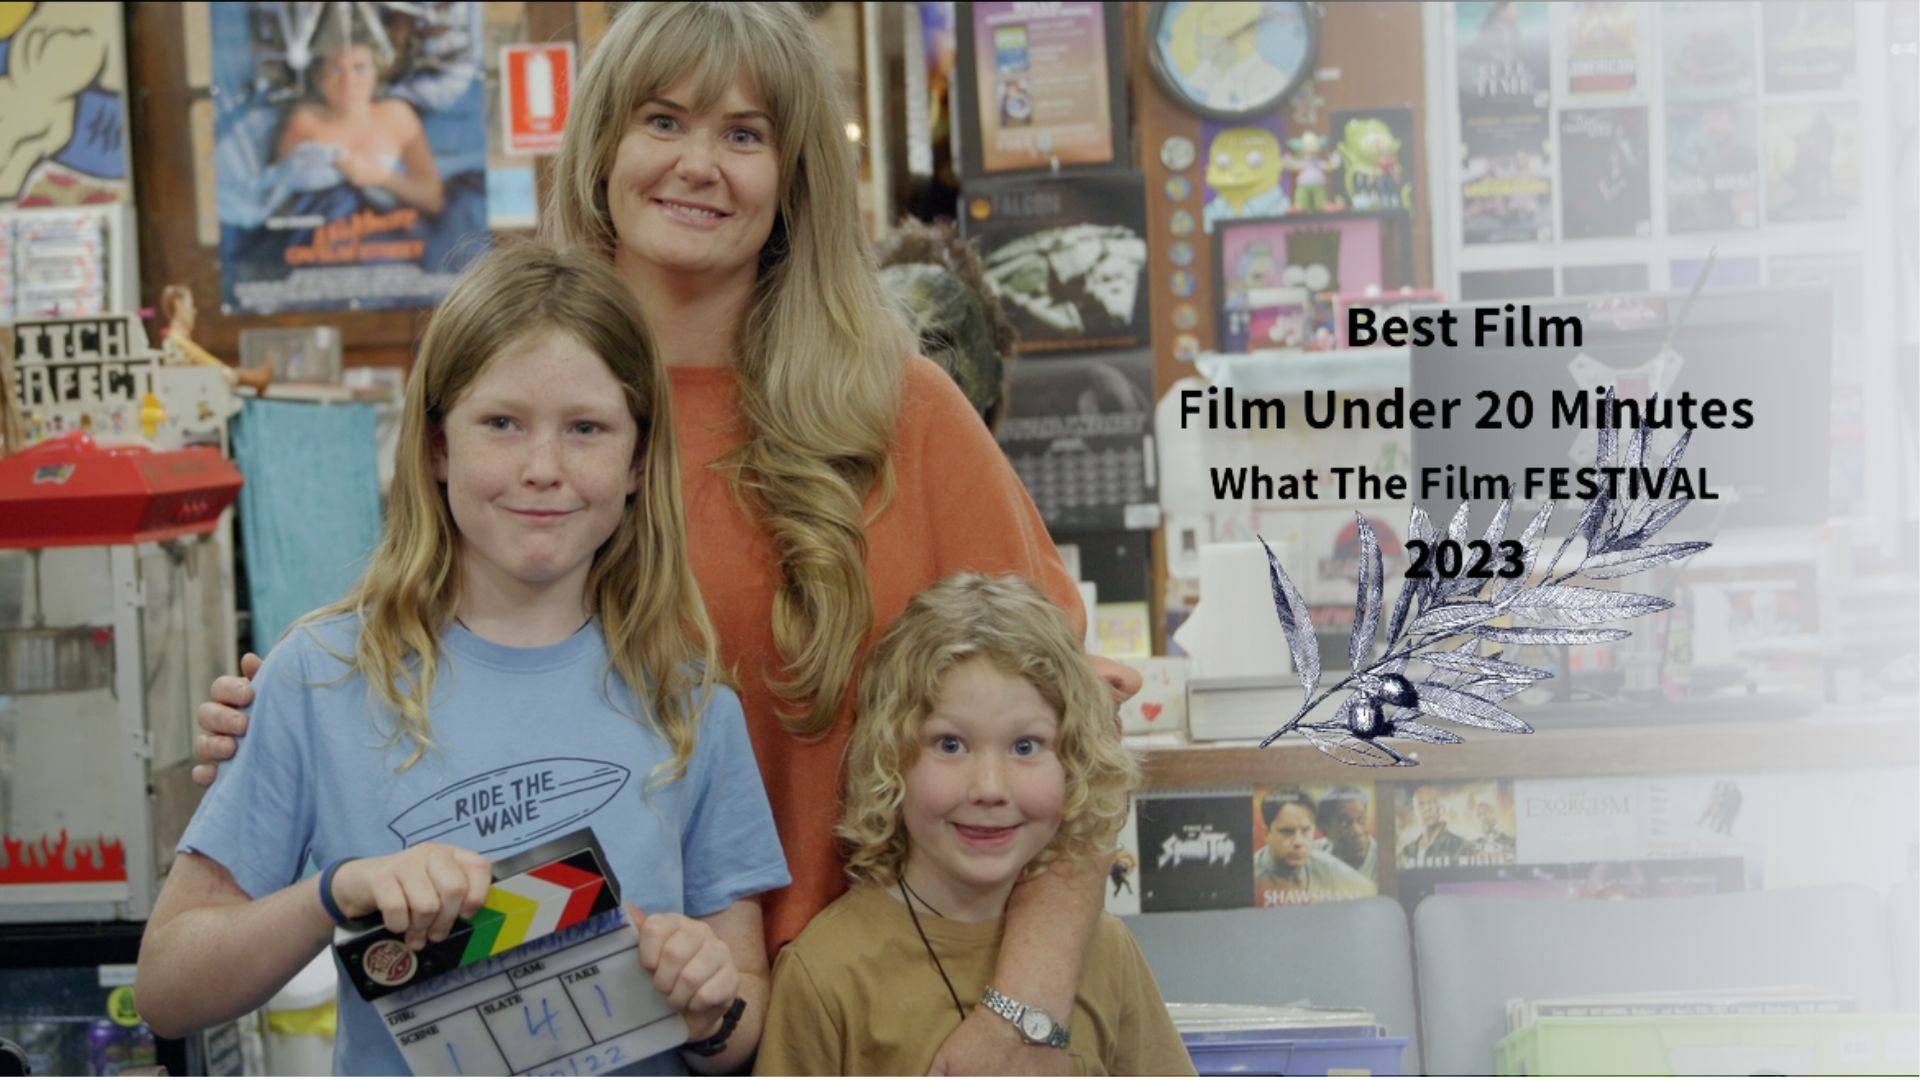 Image has a gold border and woman stands with her two young children, one holding a film clapper board in a video store from the documentary Return Chute: The survival of a small town video store with a winning laurel and text in image "Best Film Under 20 minutes What The Film Festival 2023"